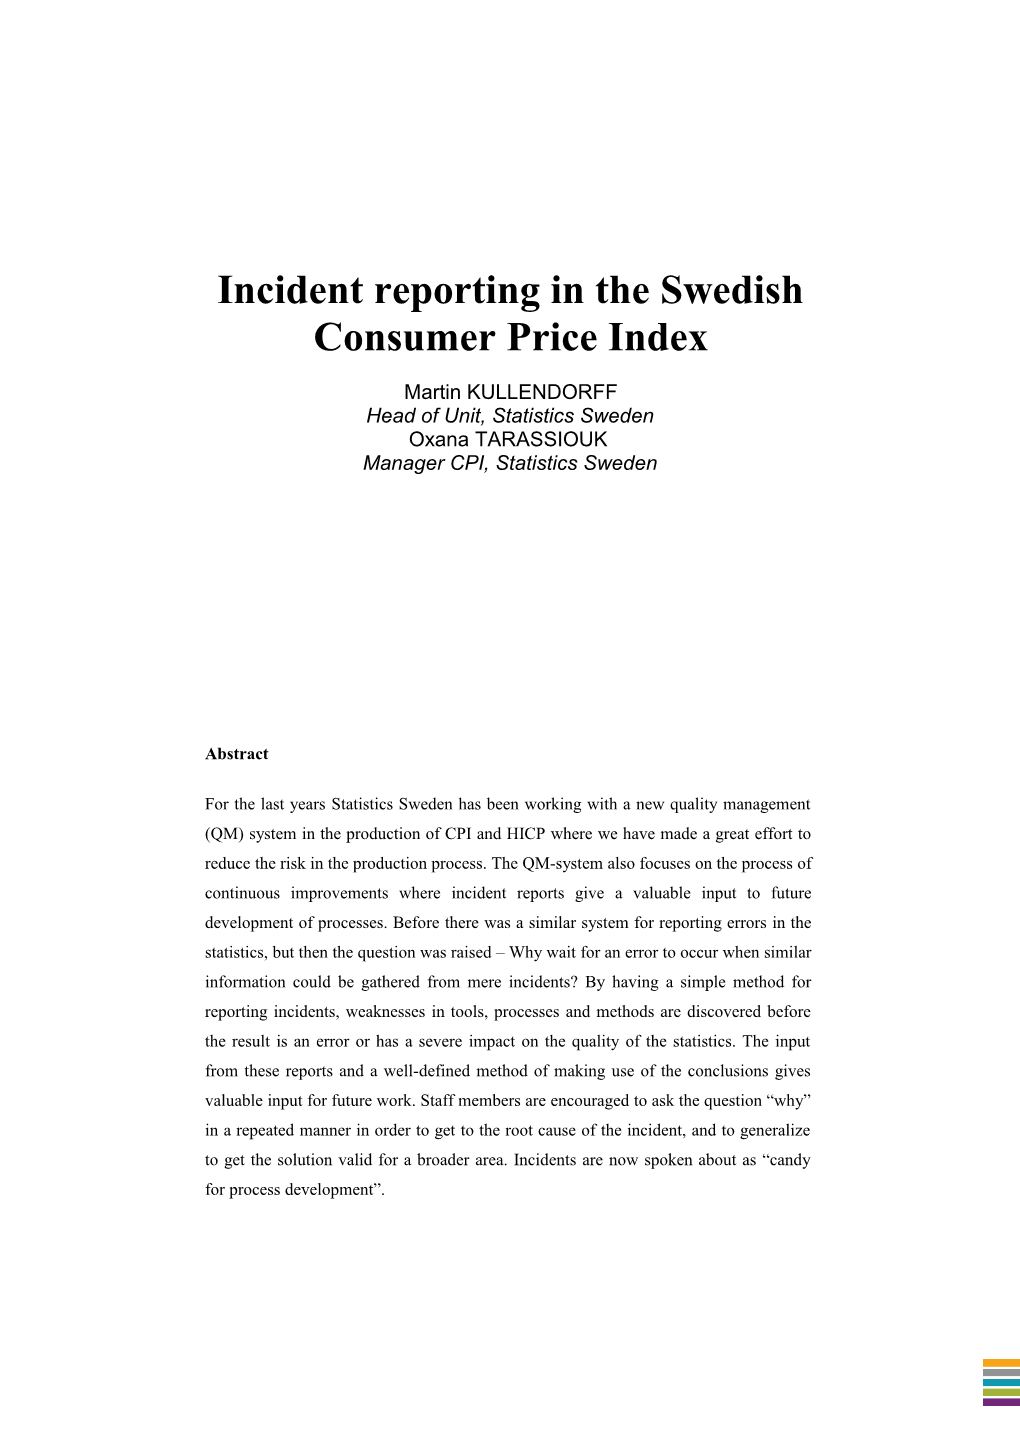 Incident Reporting in the Swedish Consumer Price Index